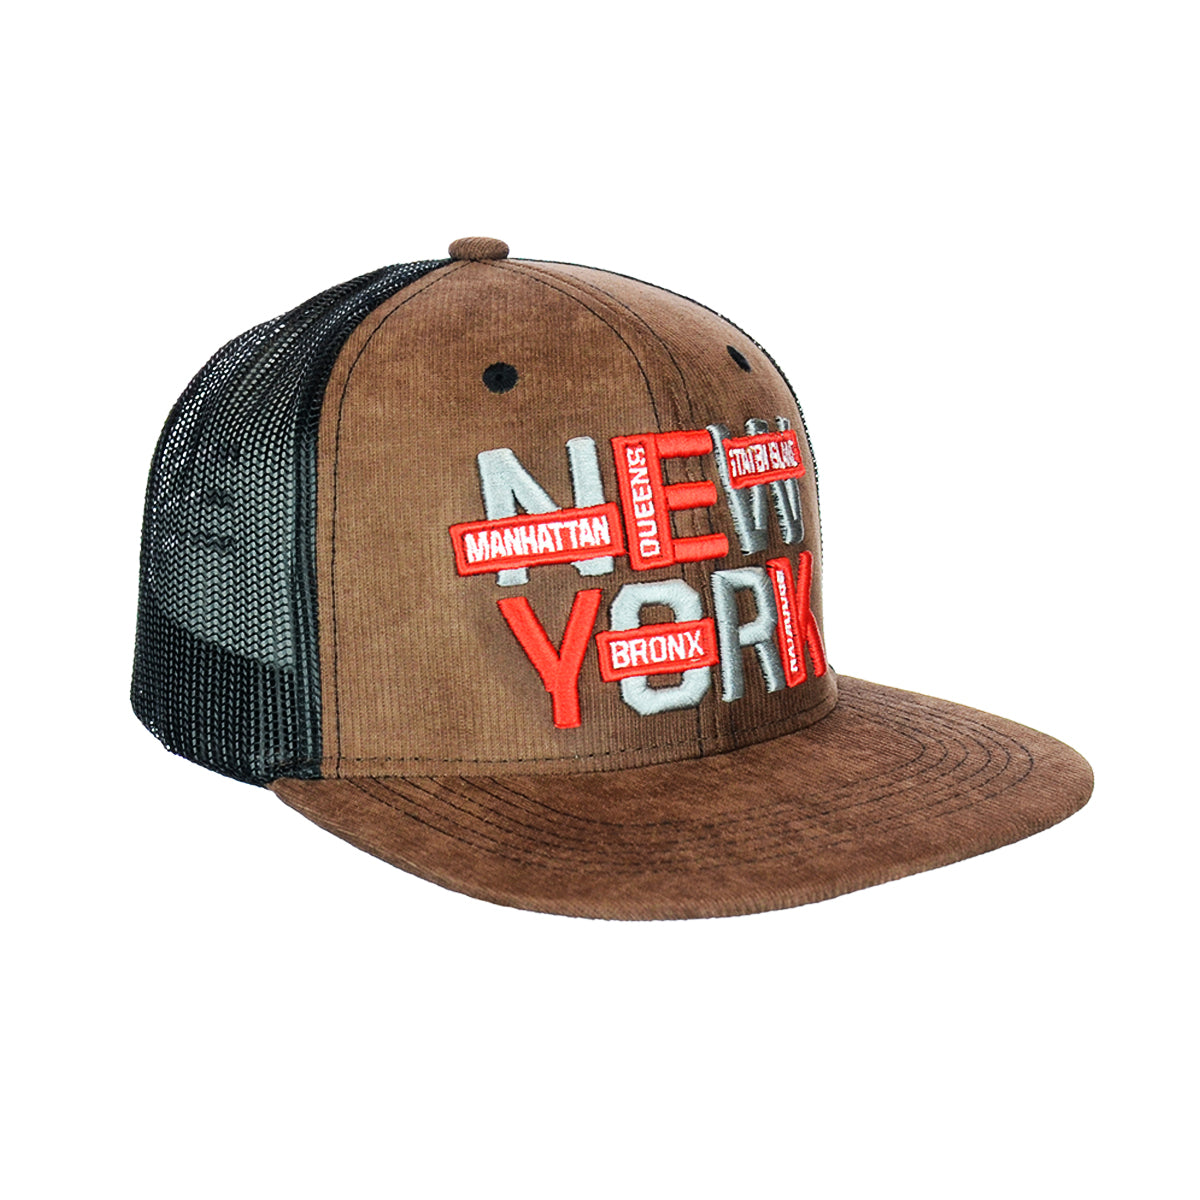 Snapback "NEW YORK" Hat Embroidered